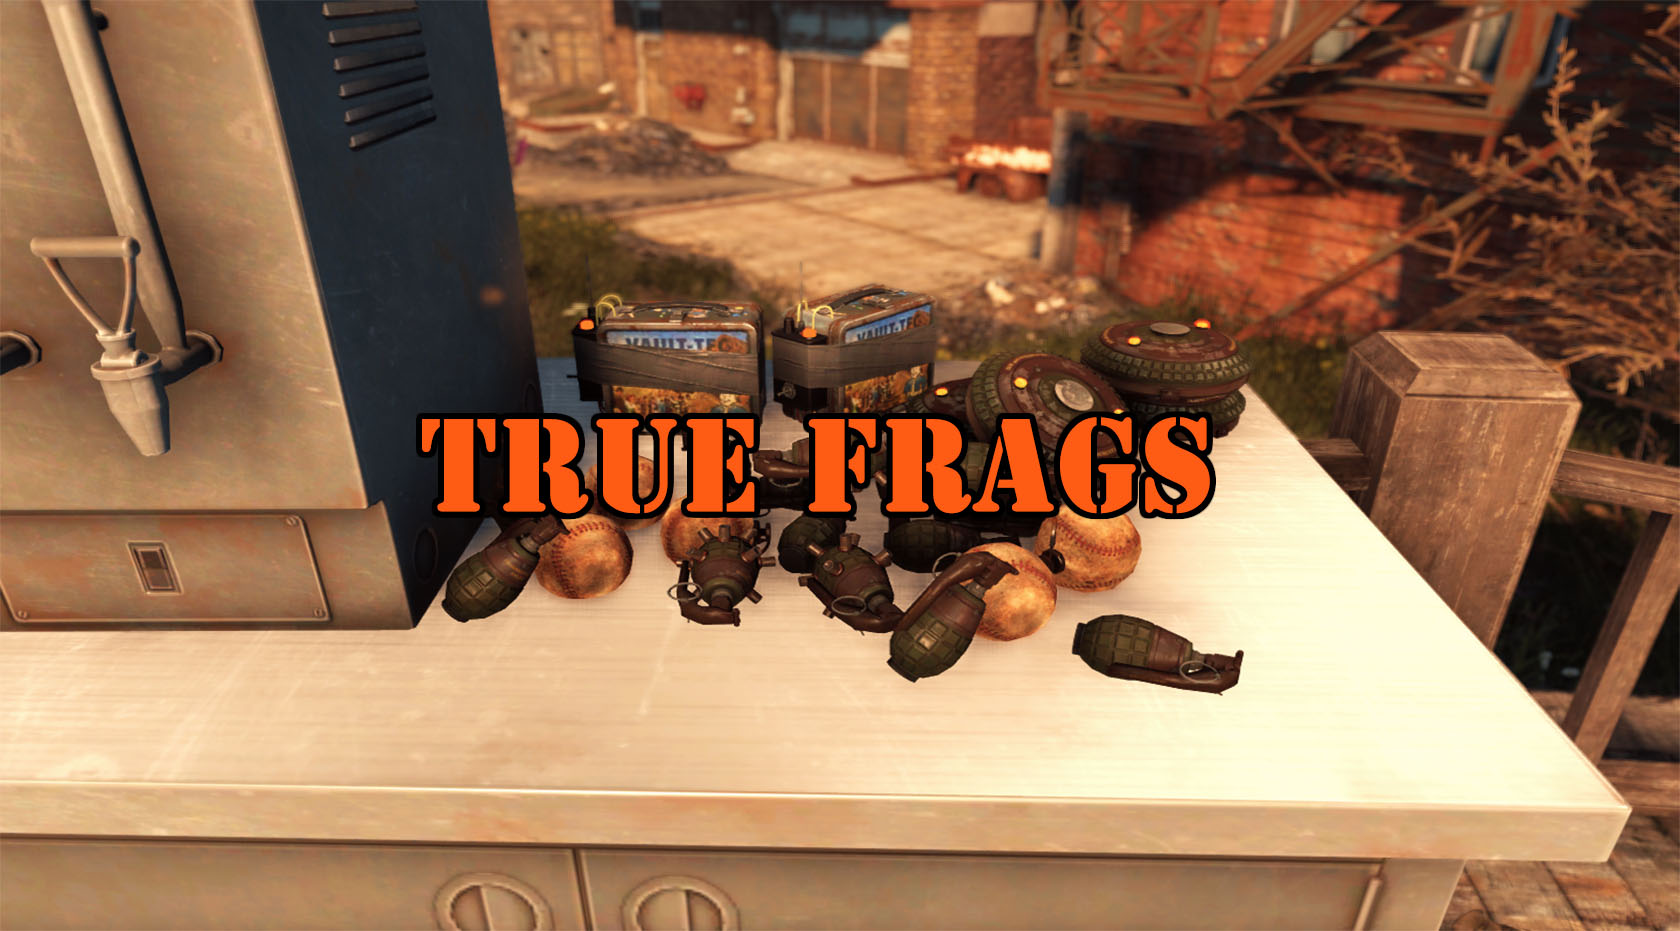 True frags fallout 4 фото 1